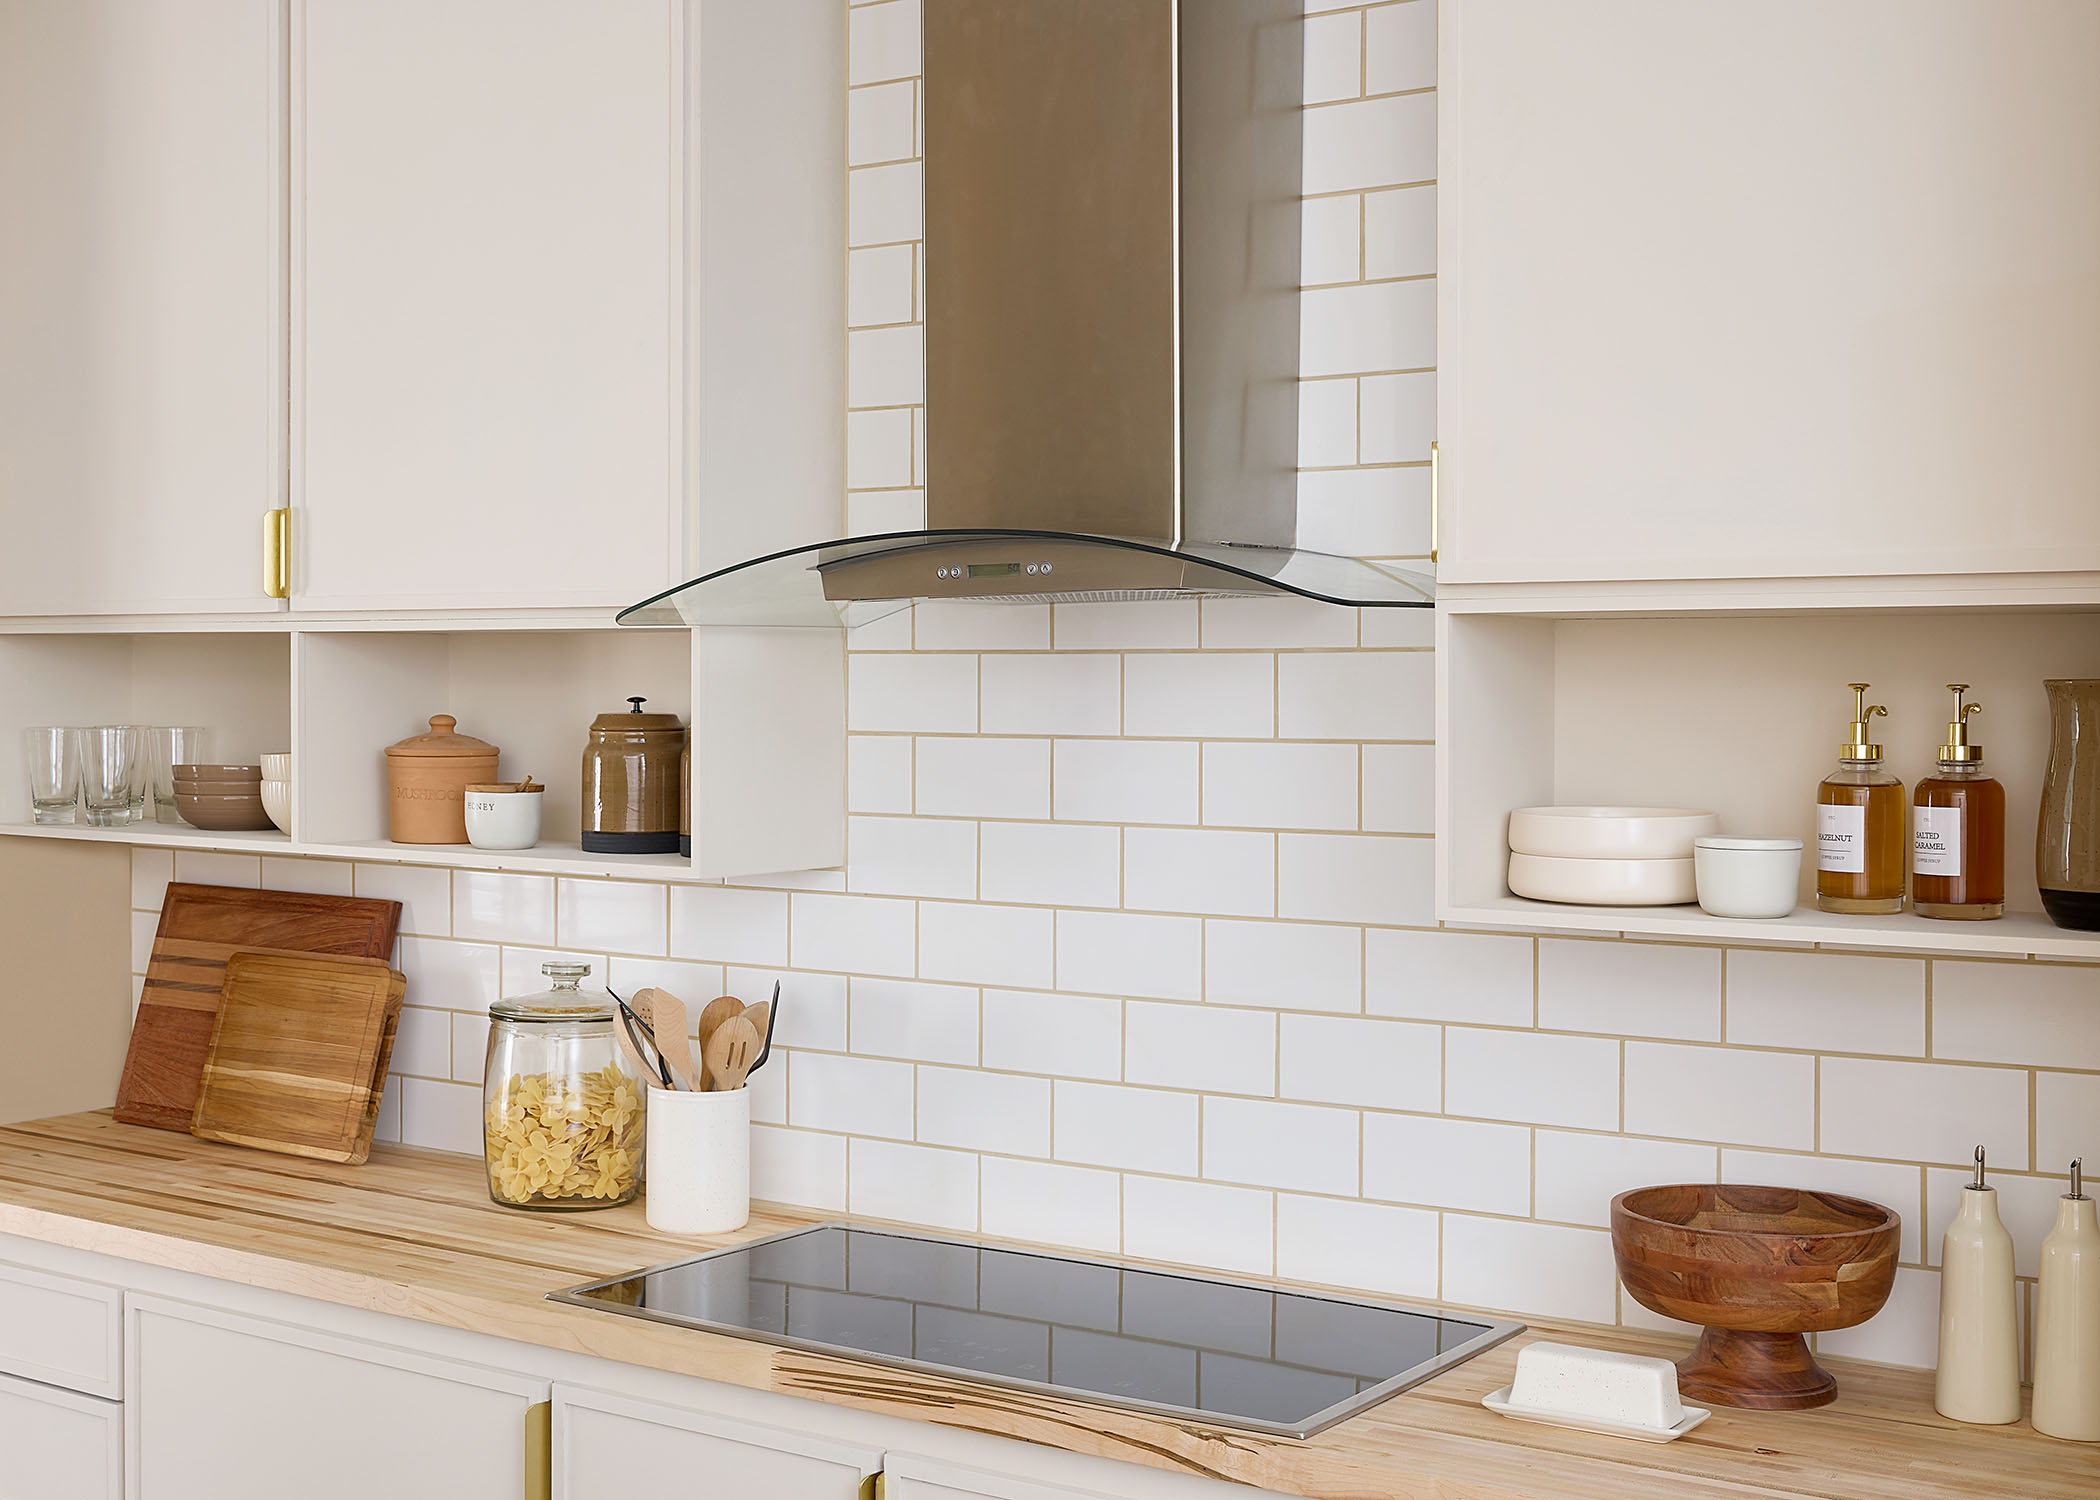 white subway tile in kitchen with stainless steel range hood plus glass cooktop and butcher block countertop